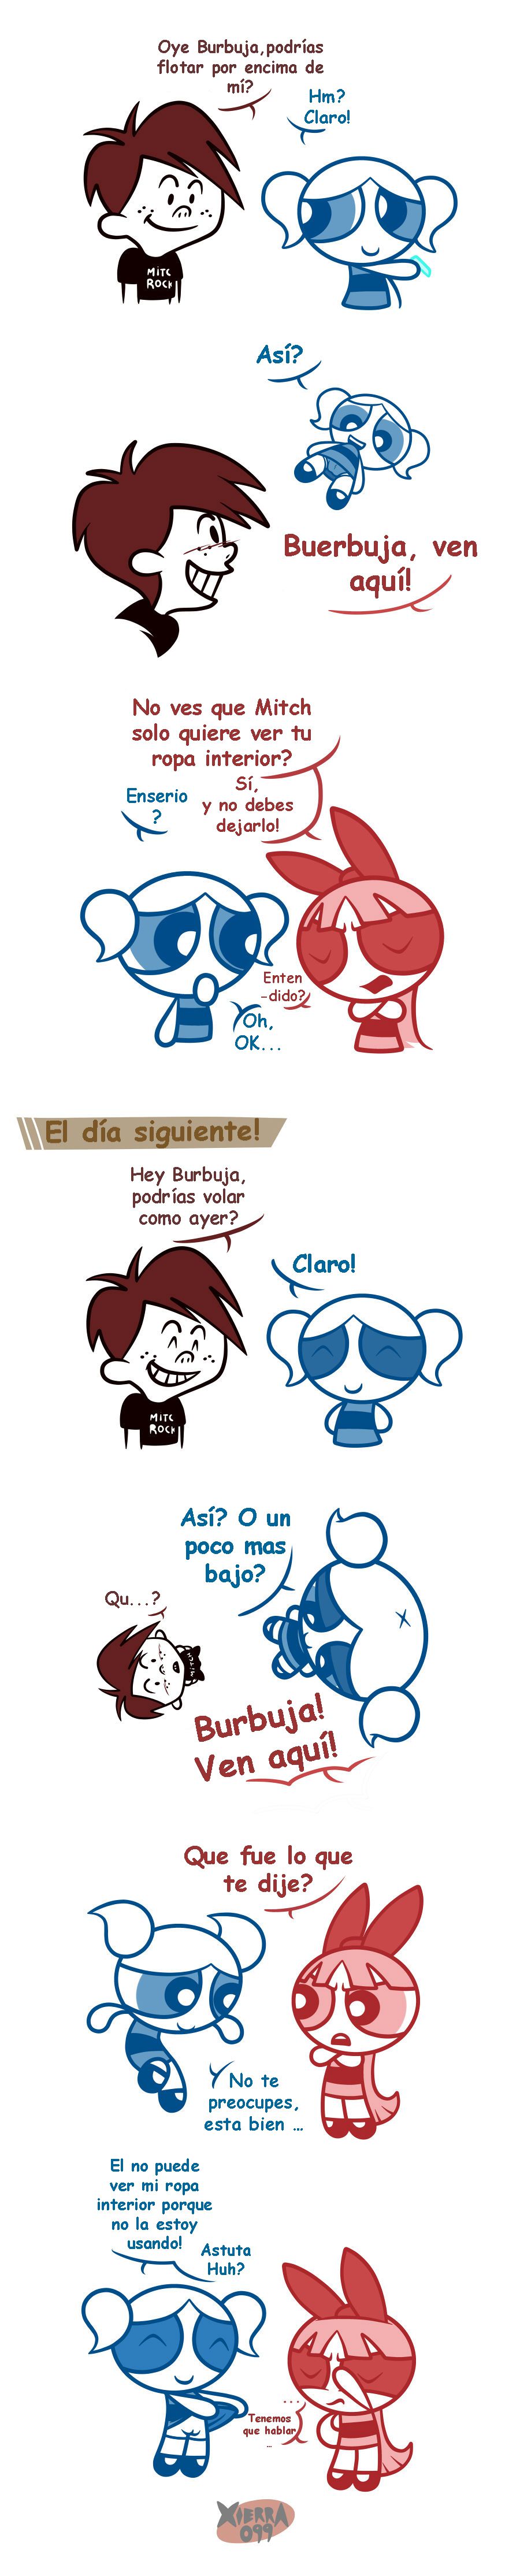 [Xierra099] PPG Strips [Ongoing] Spanish 23